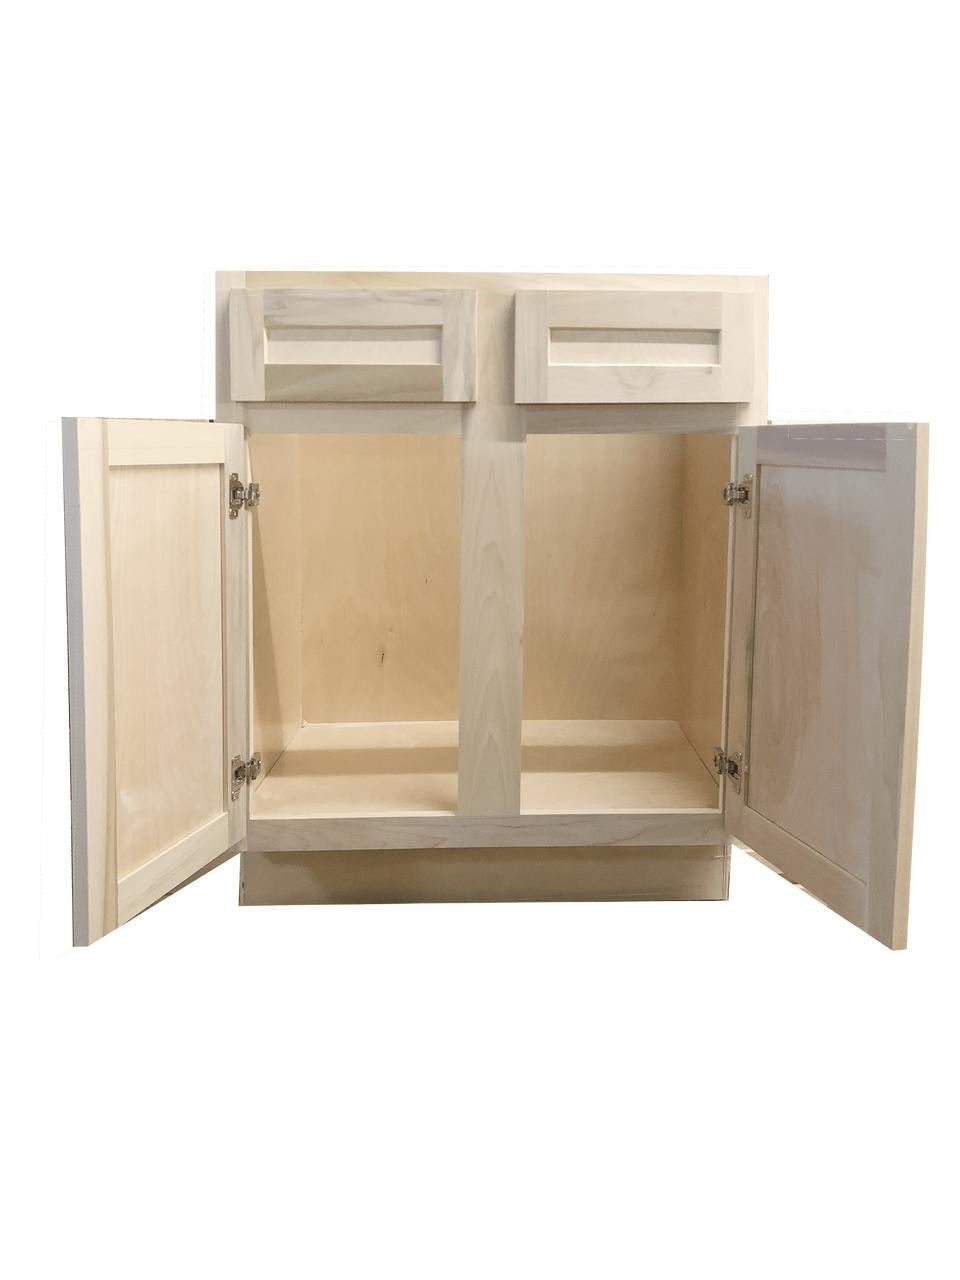 https://cdn11.bigcommerce.com/s-sryqni/images/stencil/1280x1280/products/14571/32354/30-in-sink-base-bathroom-vanity-cabinet-in-unfinished-poplar-or-shaker-style__00693.1659373761.jpg?c=2